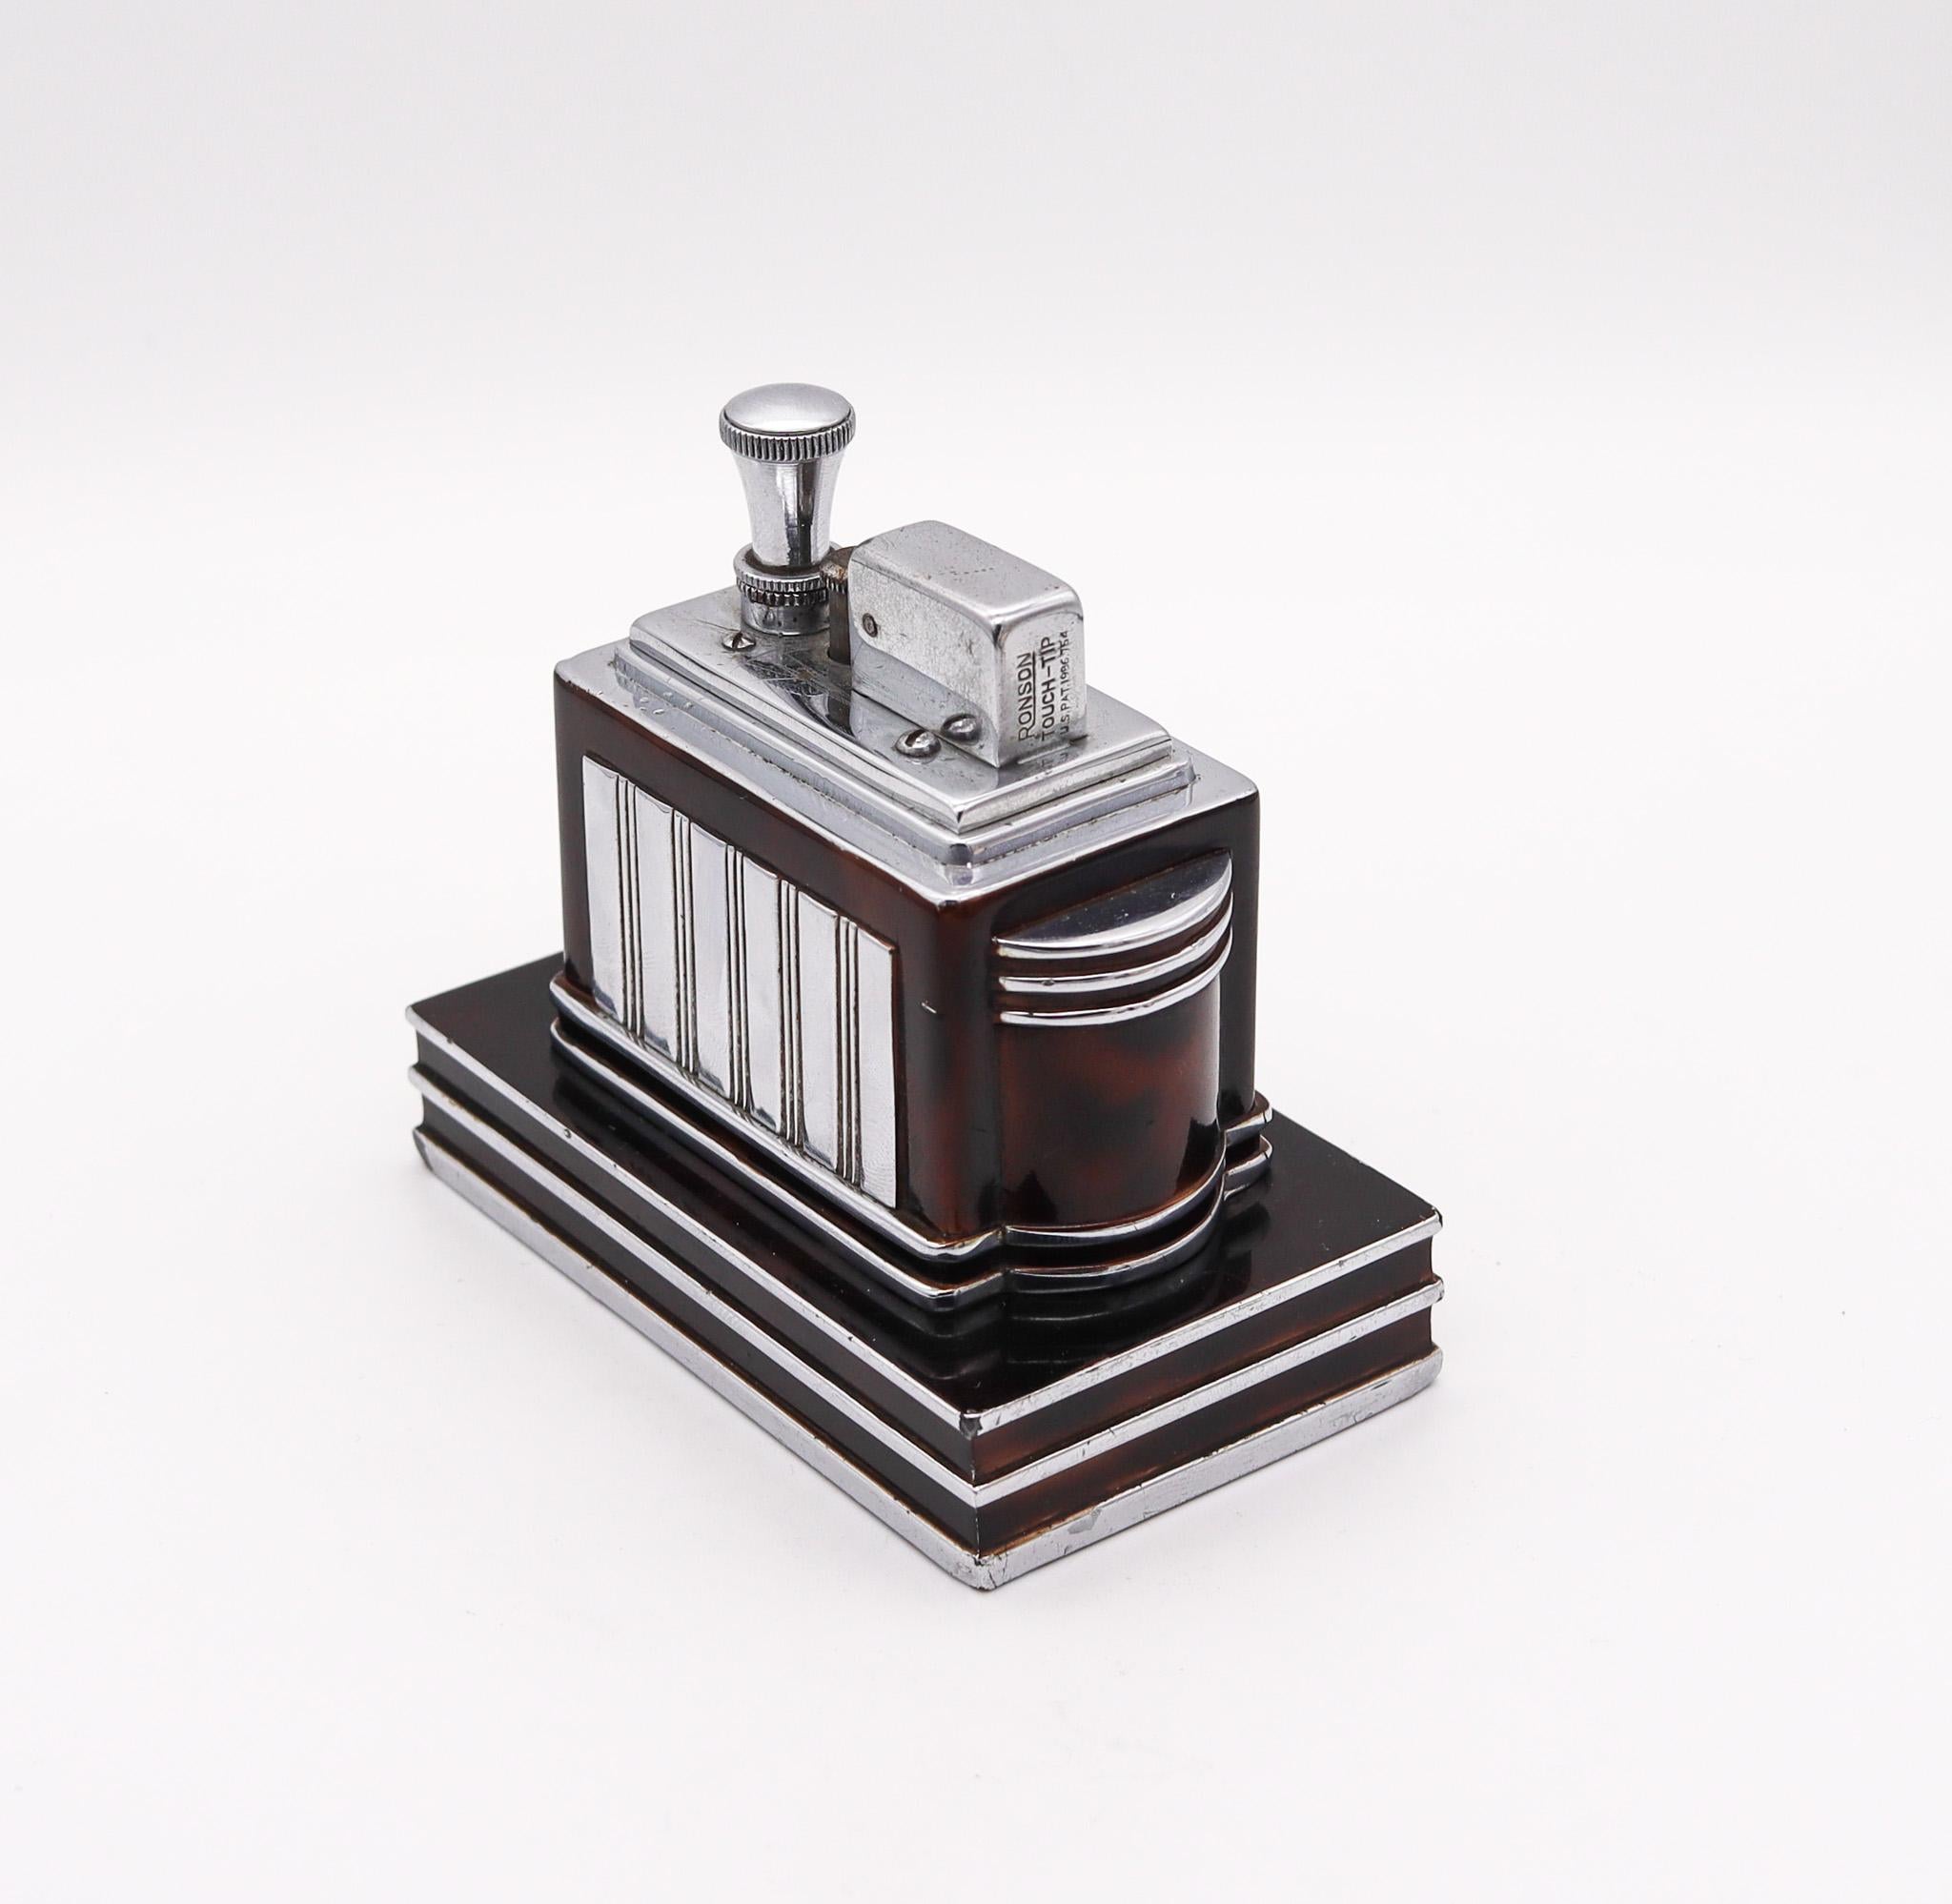 A Deluxe desk lighter designed by Ronson.

This extremely rare Ronson Deluxe Classic Touch-Tip lighter was made in 1938 by the Ronson Art Metal Works Inc. located in Newark, New Jersey in the United States. This lighter began a very successful era